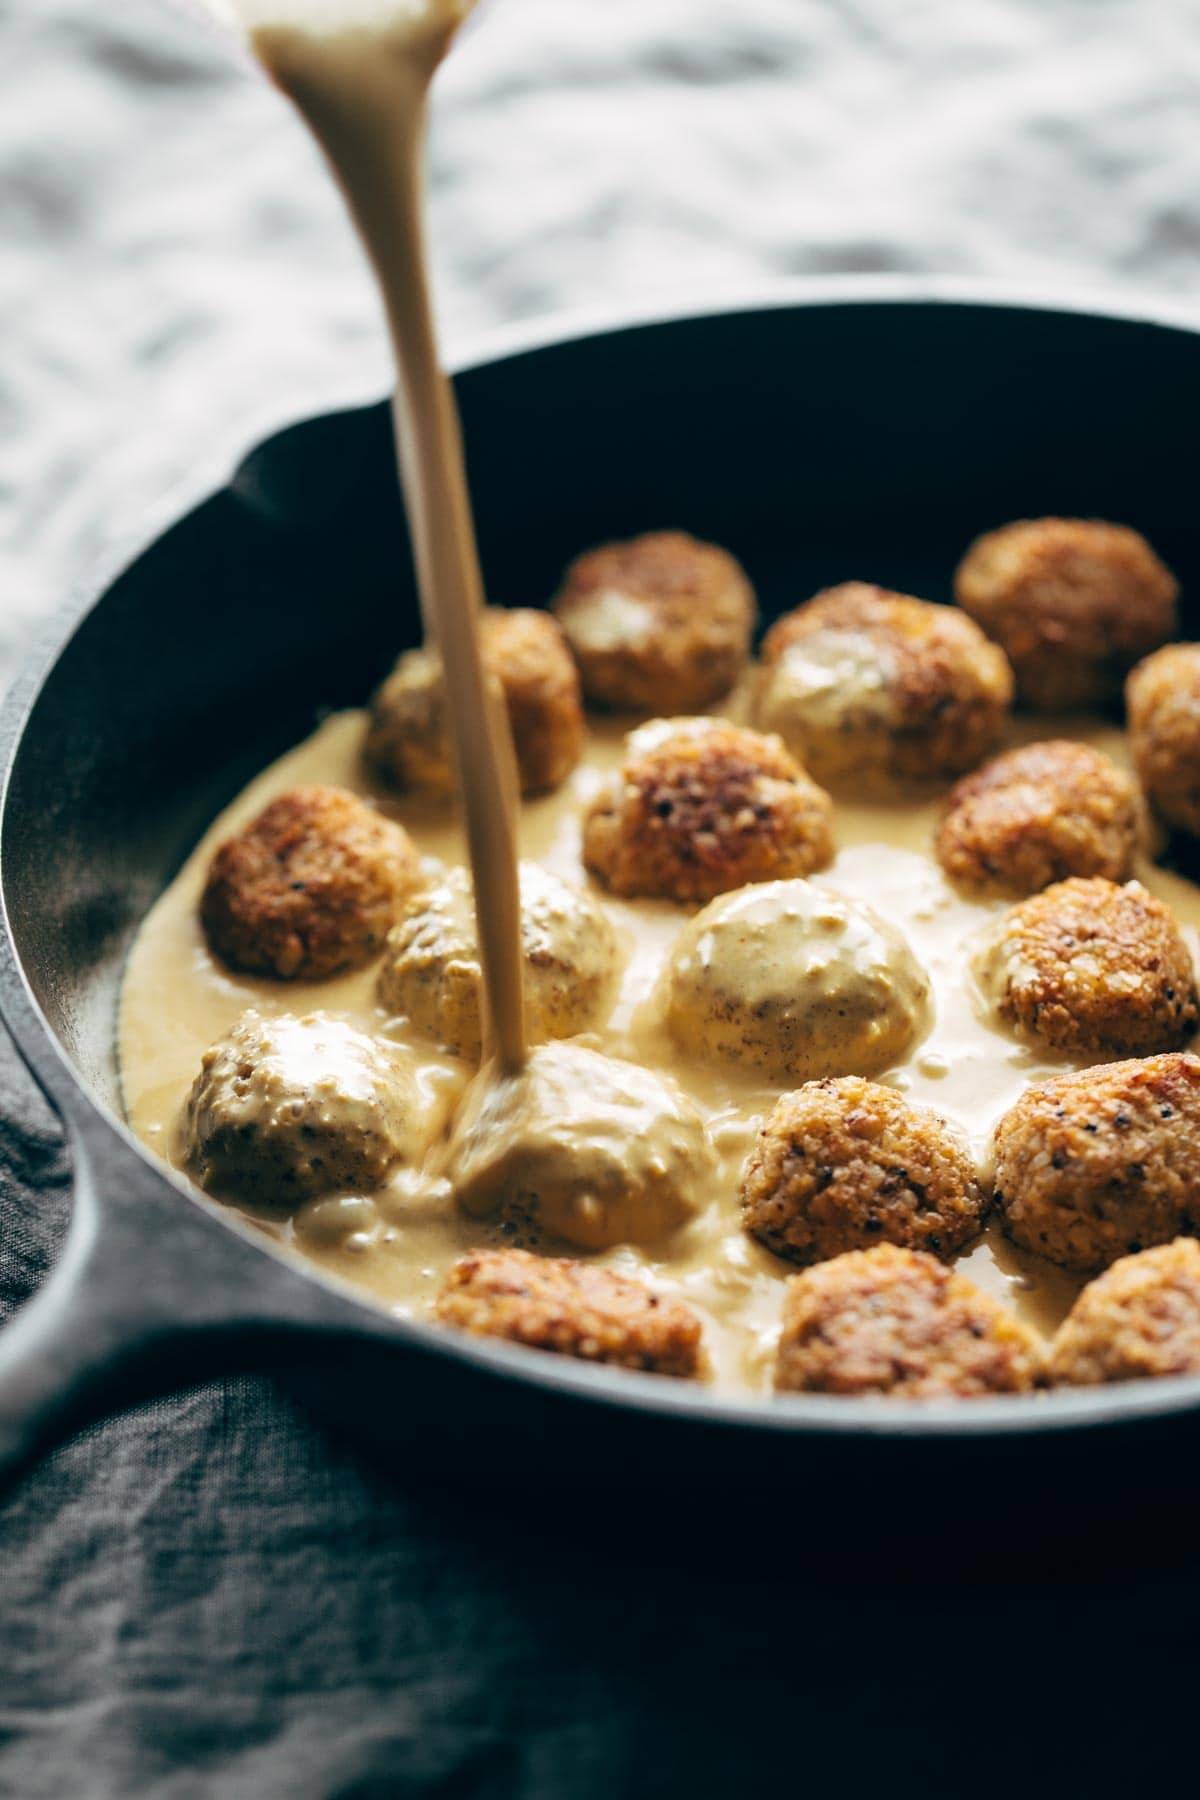 Meatballs in a pan with masala sauce drizzle.